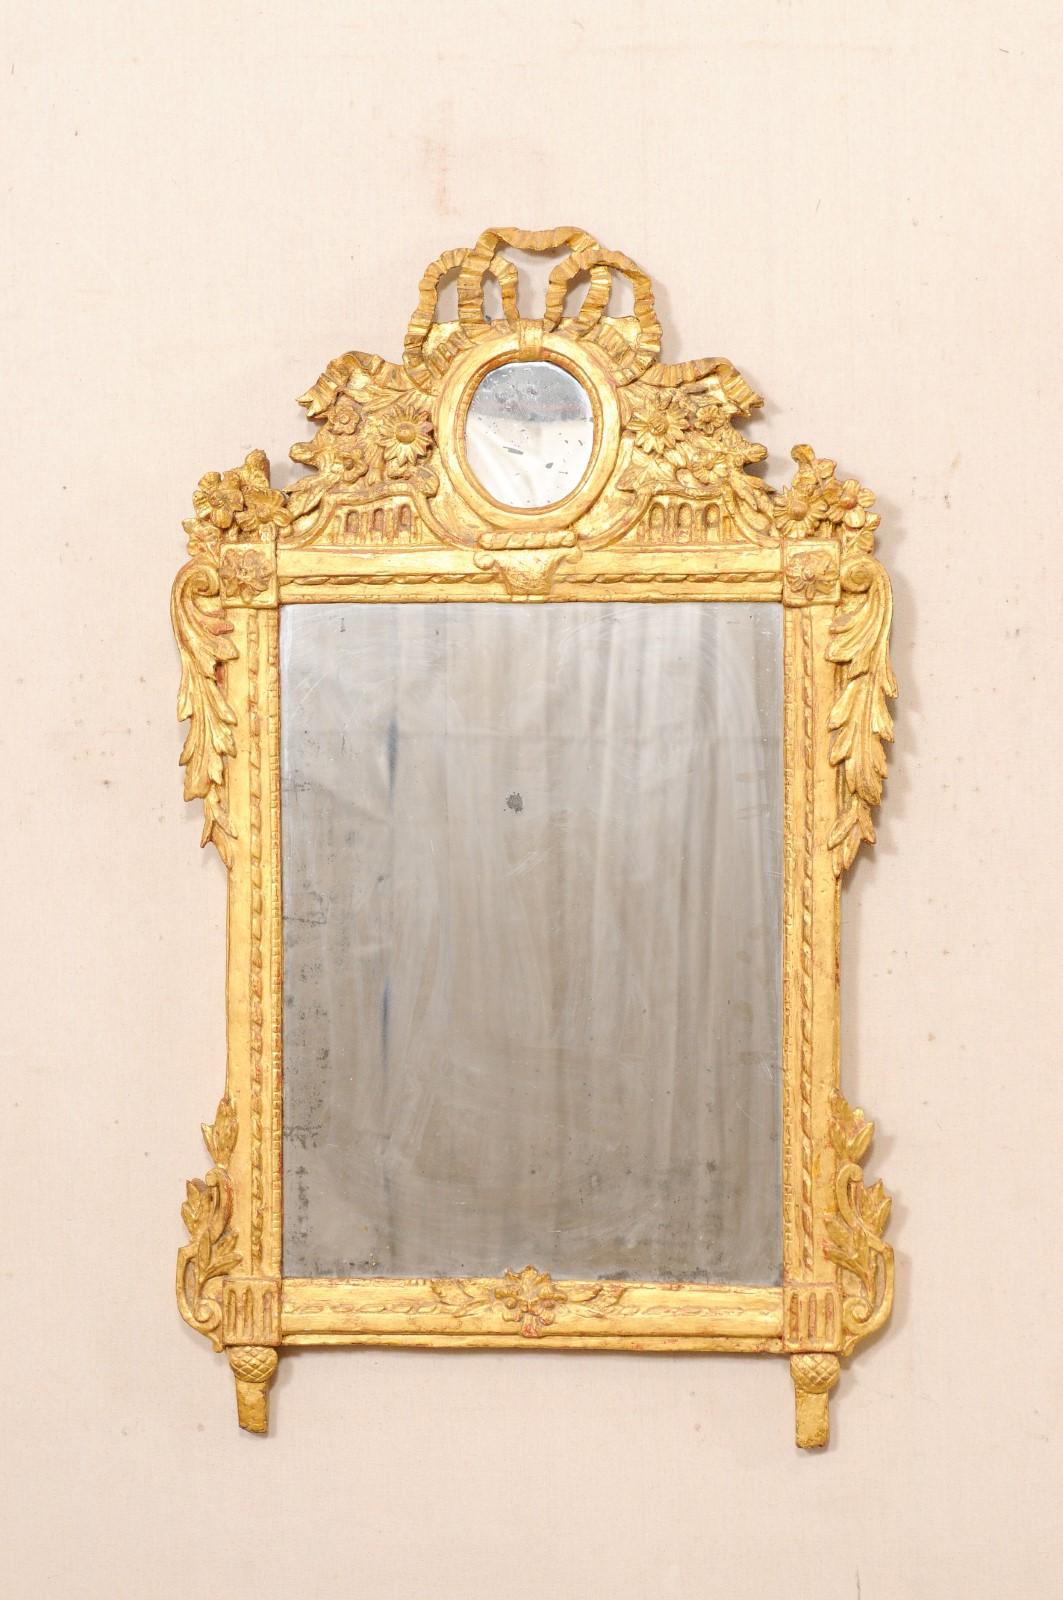 A French Neoclassical carved and gilt wood mirror from the 19th century. This antique mirror from France features a beautifully carved crest with a smaller, round-shaped mirror at center, with a bow-tie at top and cheerful flowers surrounding it at